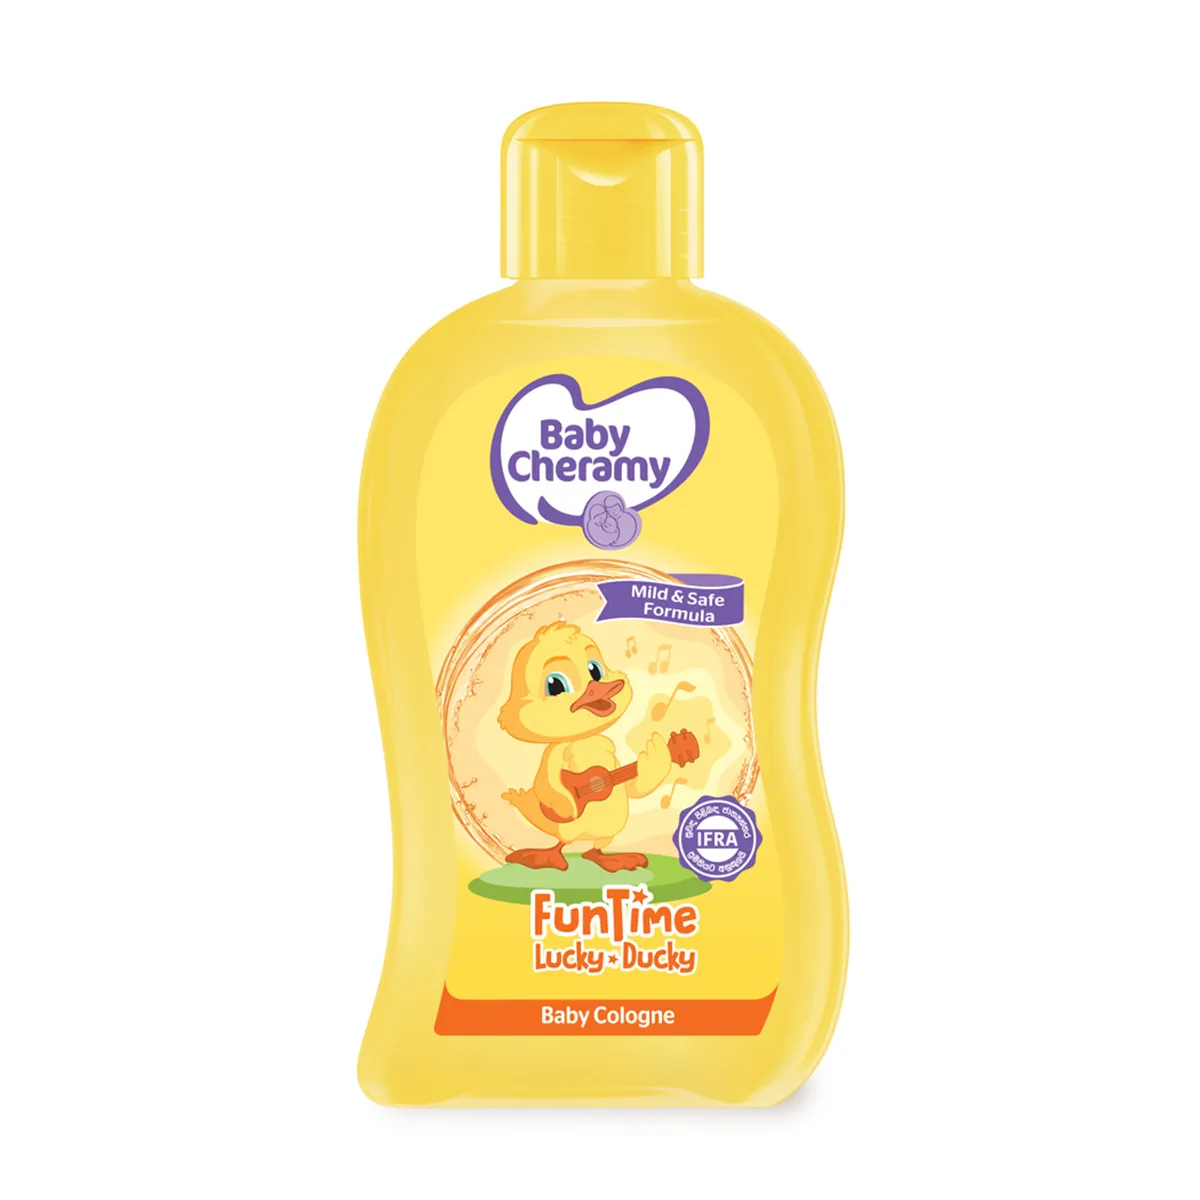 First product image of Baby Cheramy Funtime Cologne Lucky Ducky 100ml